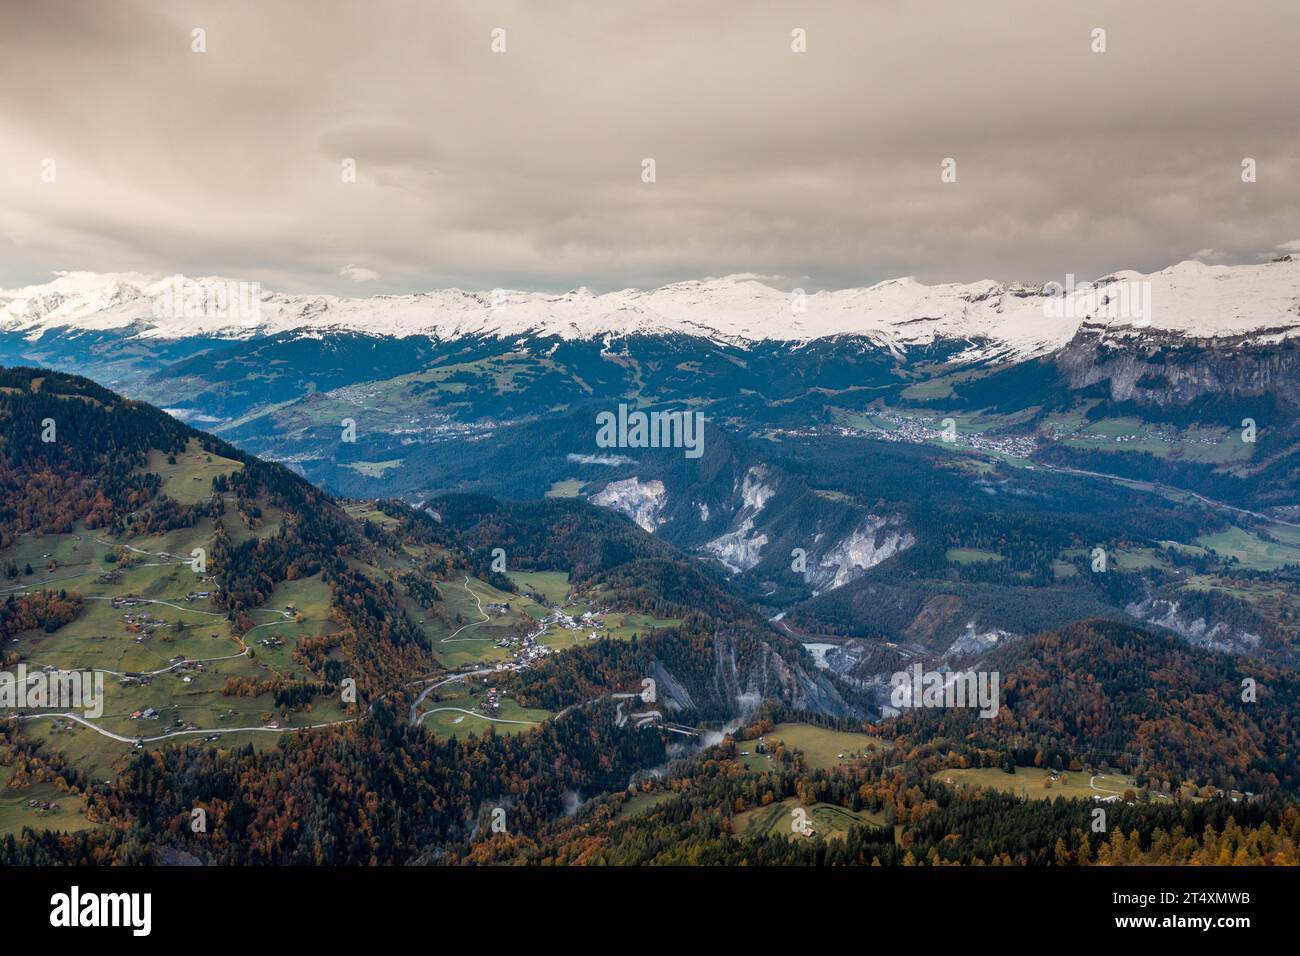 A mountain landscape in the Swiss Alps with snow-capped peaks and autum color forest Stock Photo